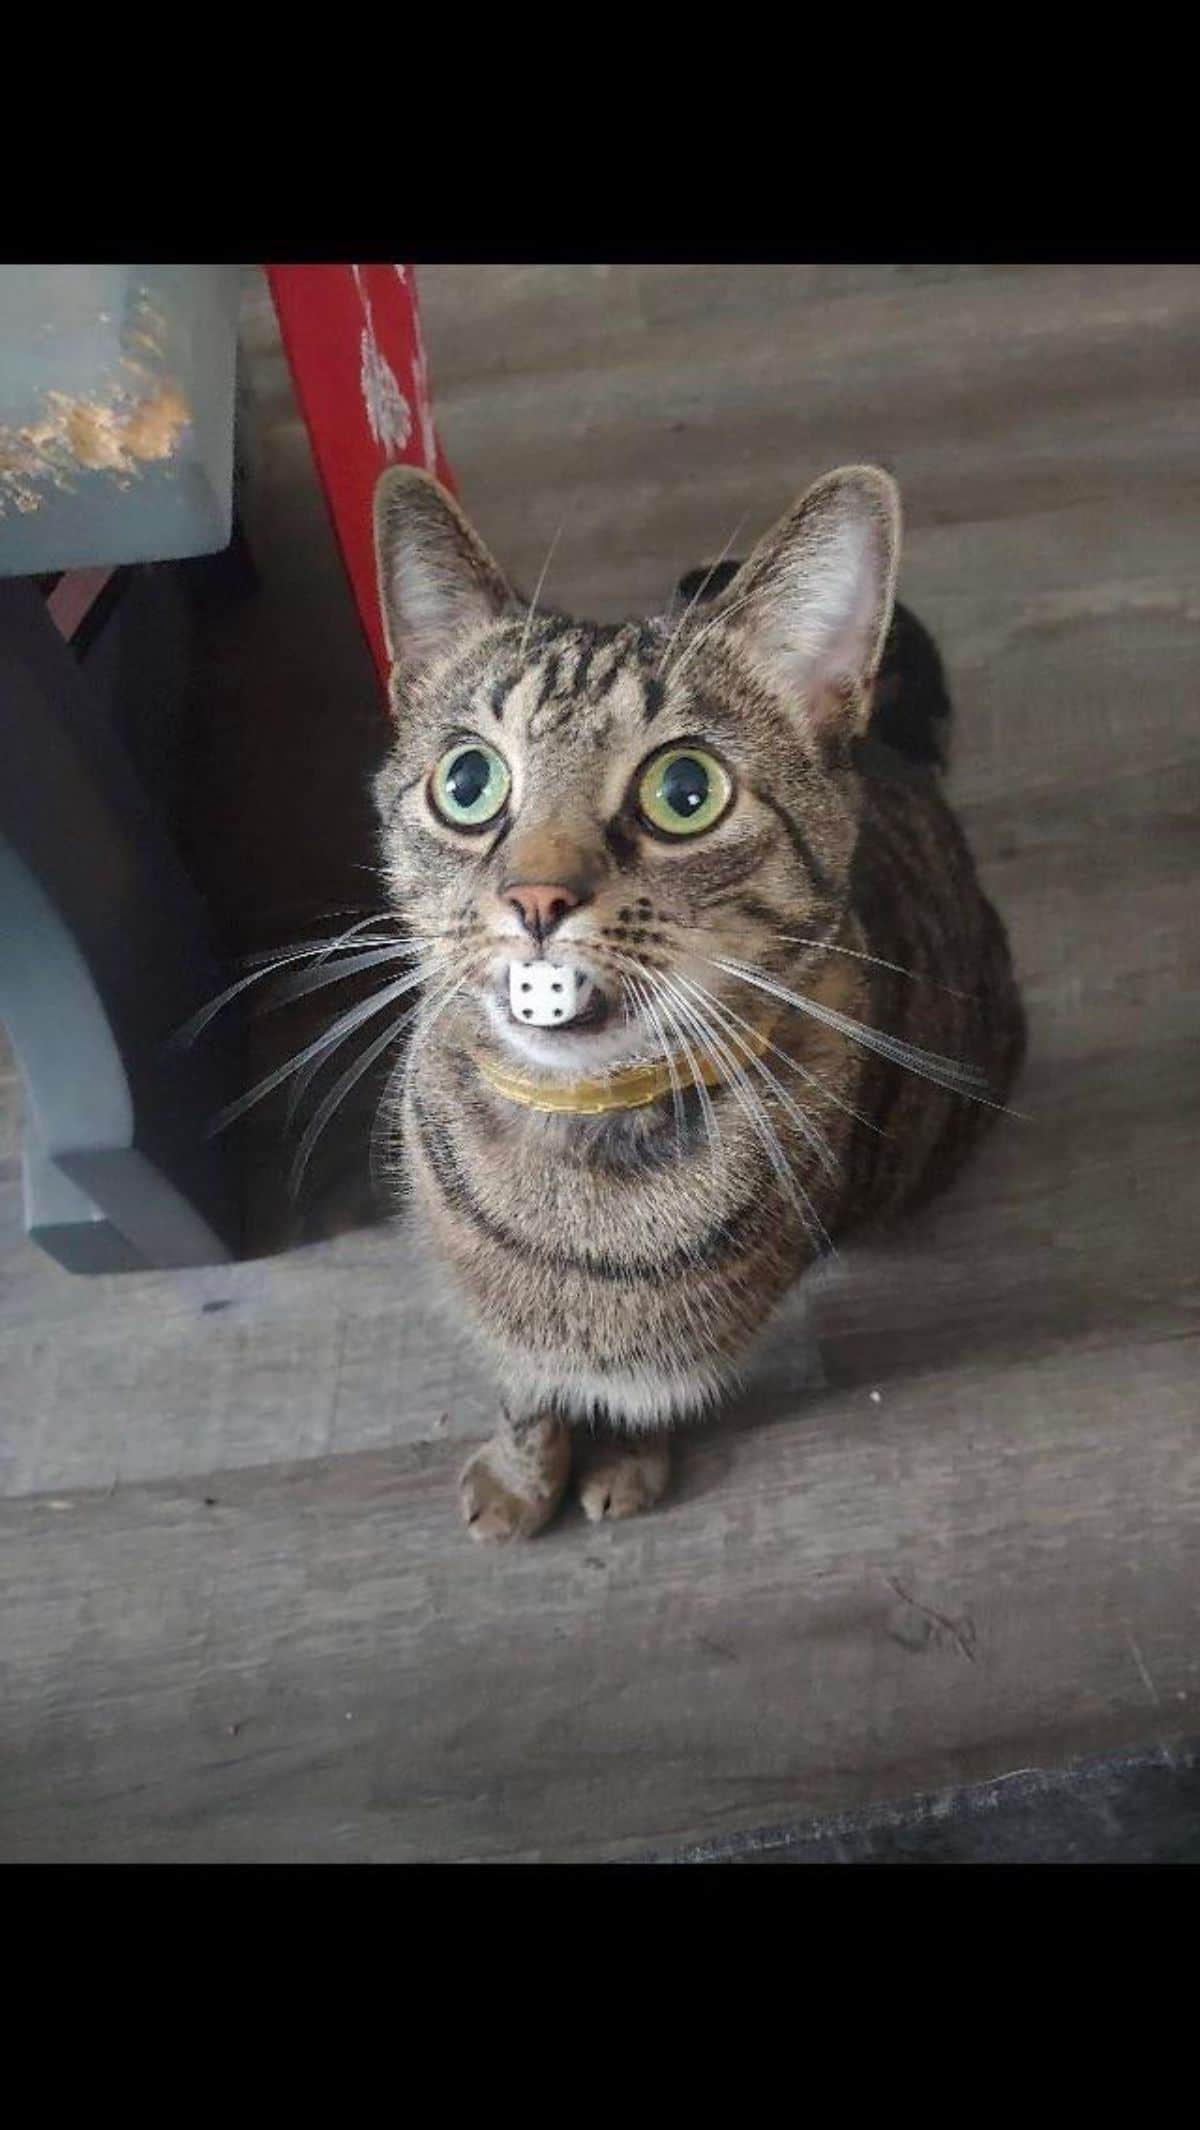 grey tabby cat sitting on the floor holding a white and black dice in its mouth